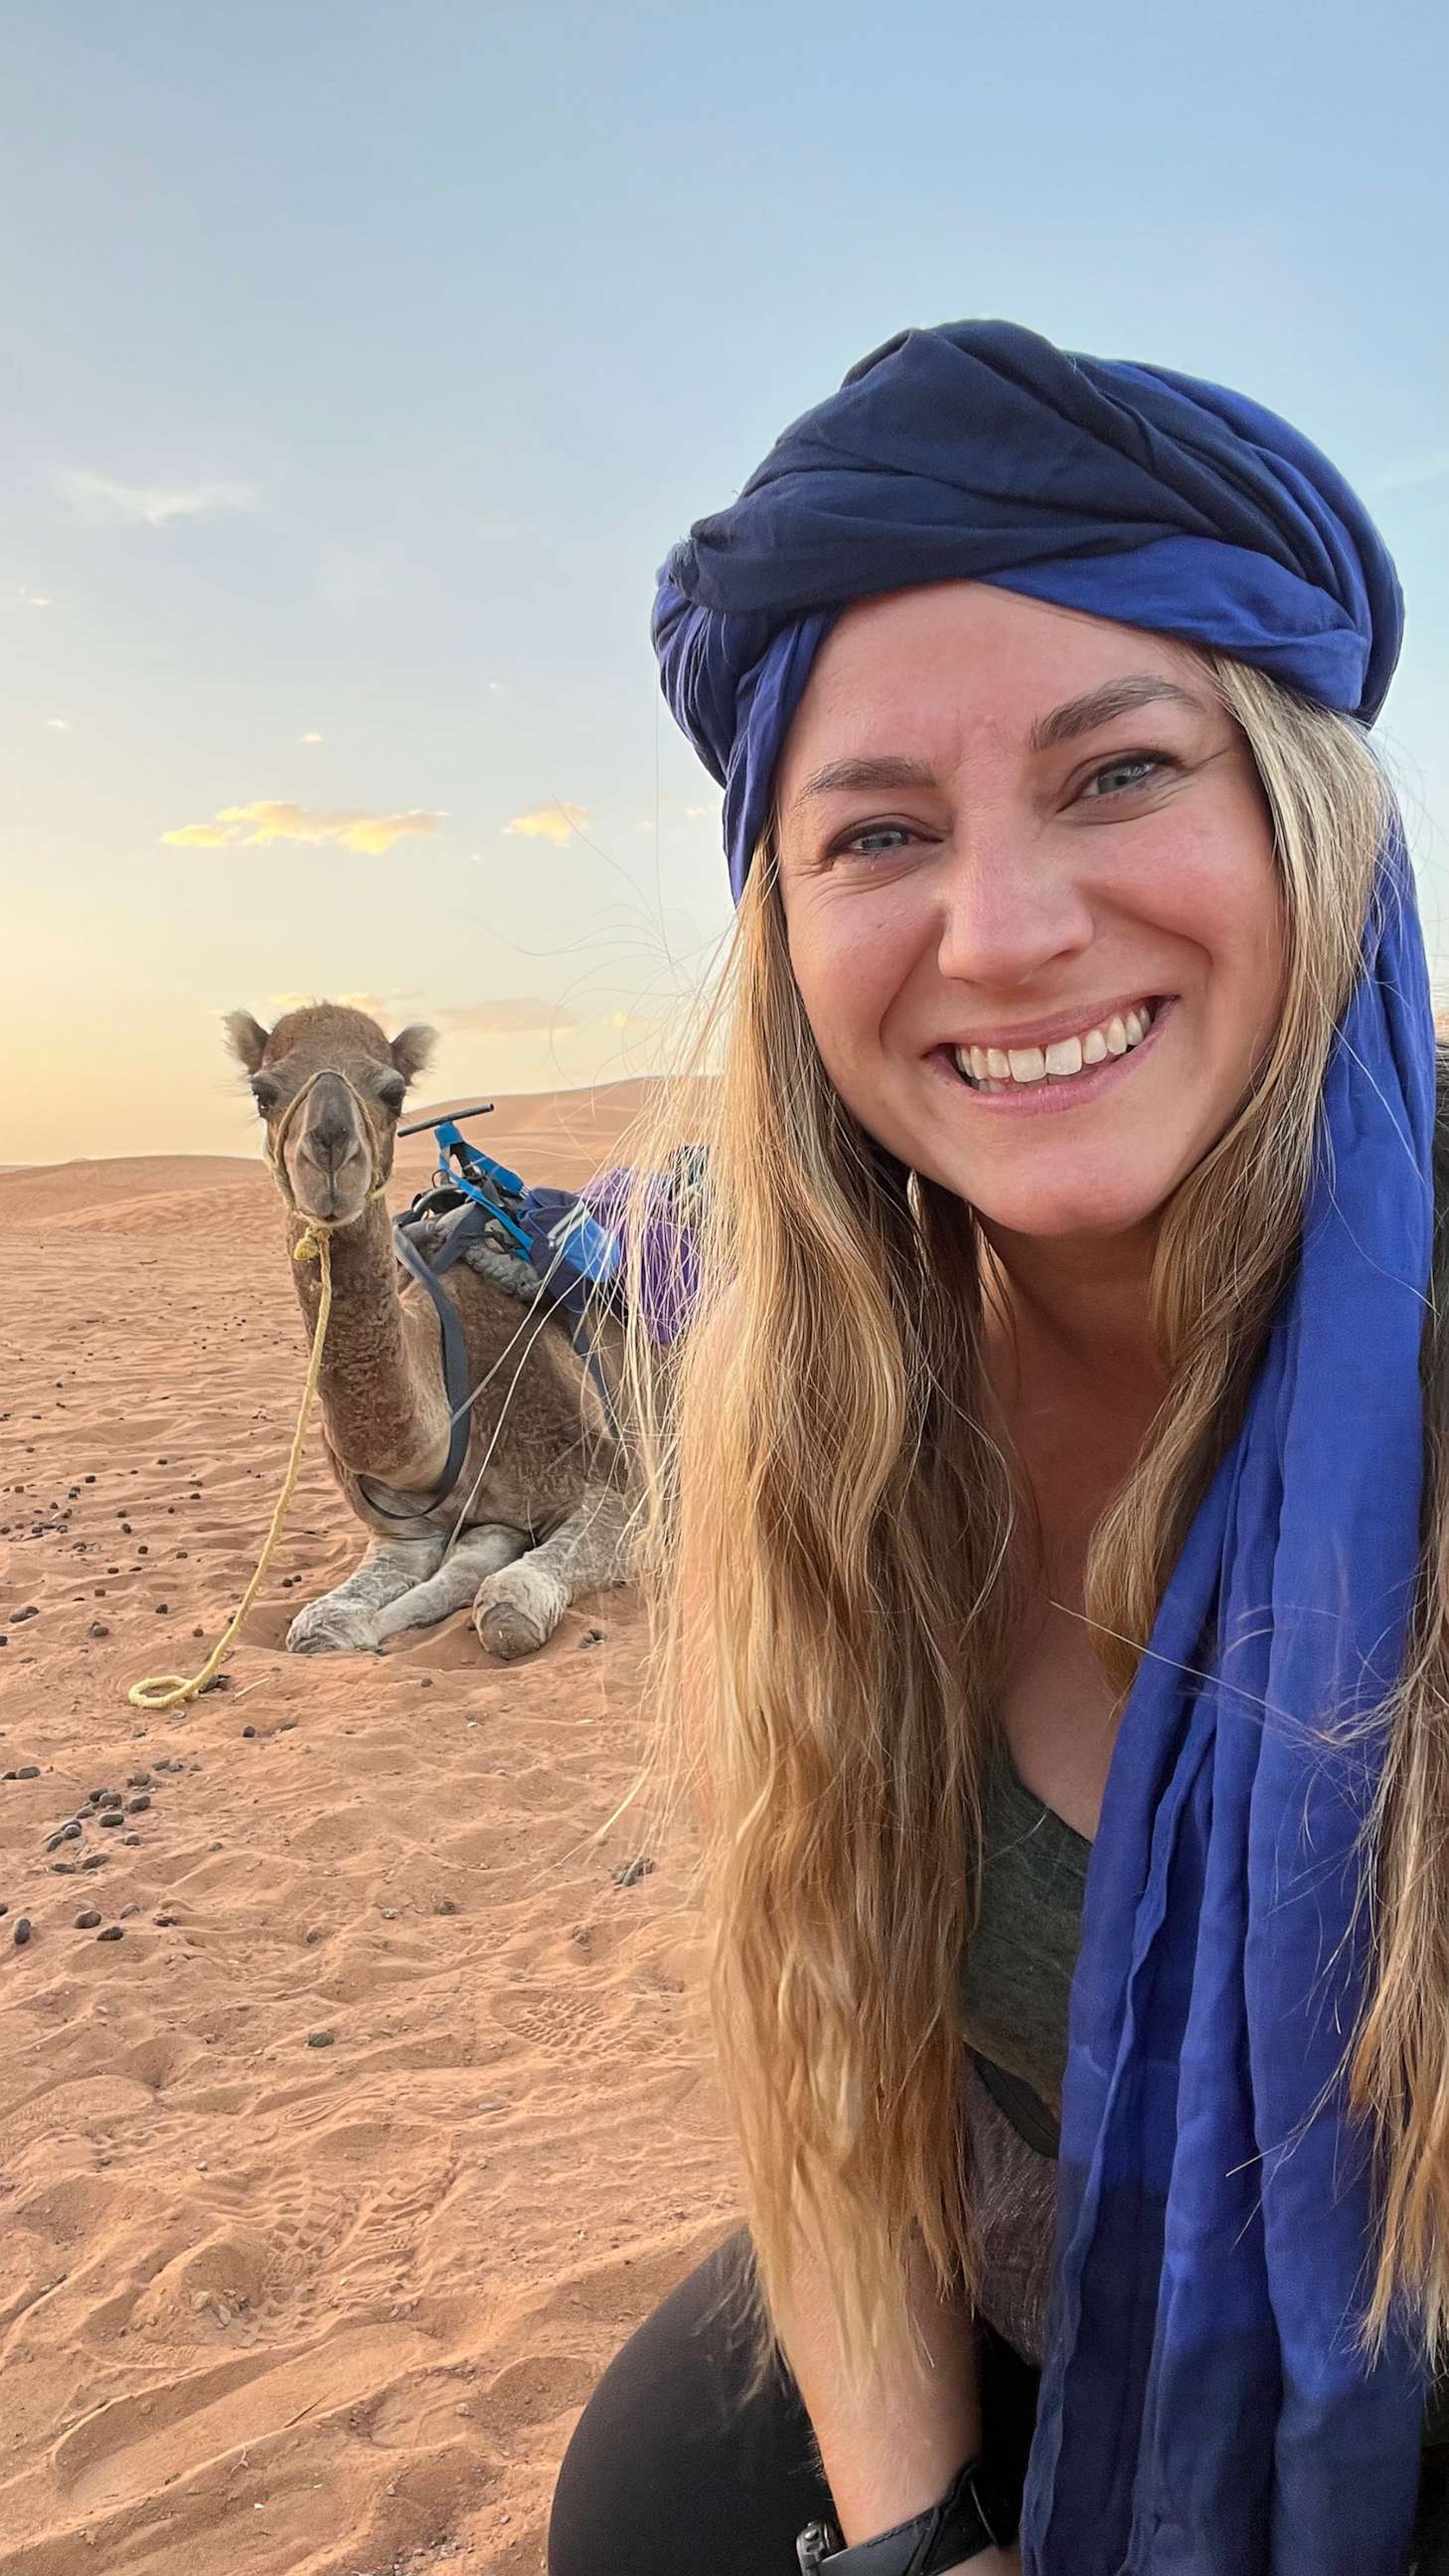 PHOTO: Loni James with a camel in Morocco.